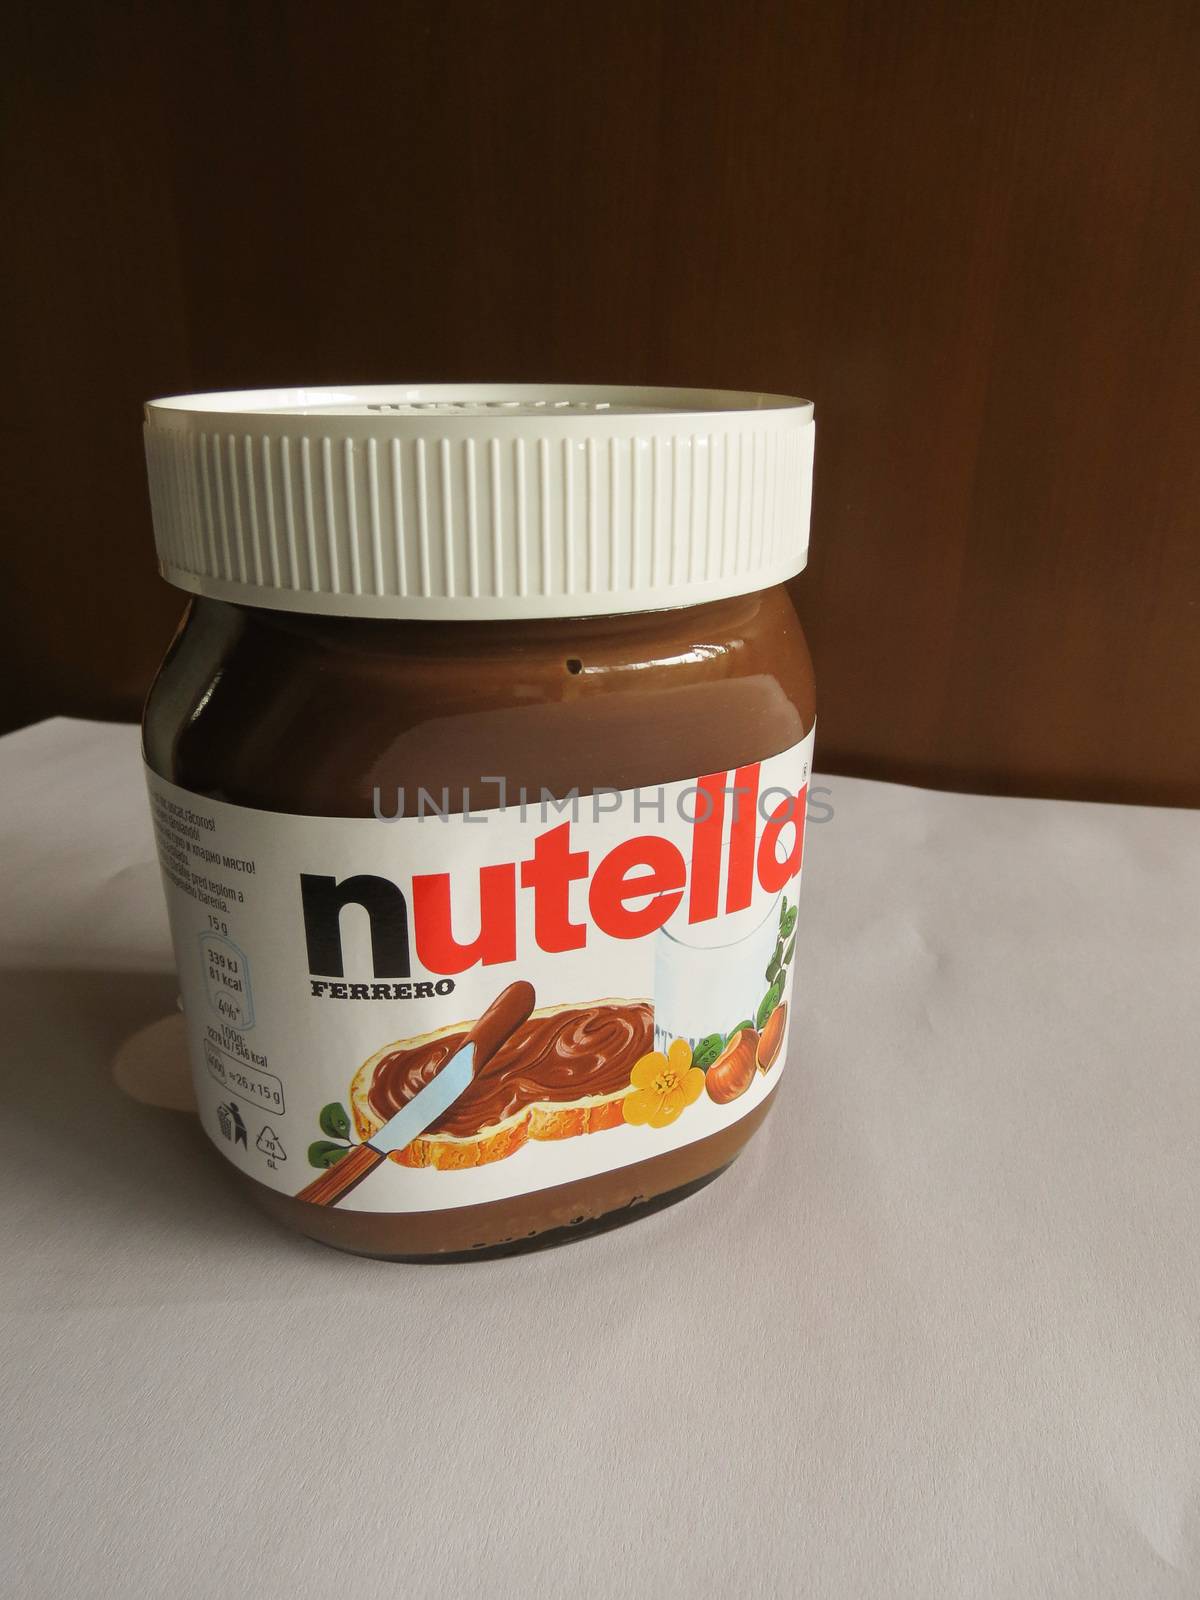 Nutella jar by paolo77